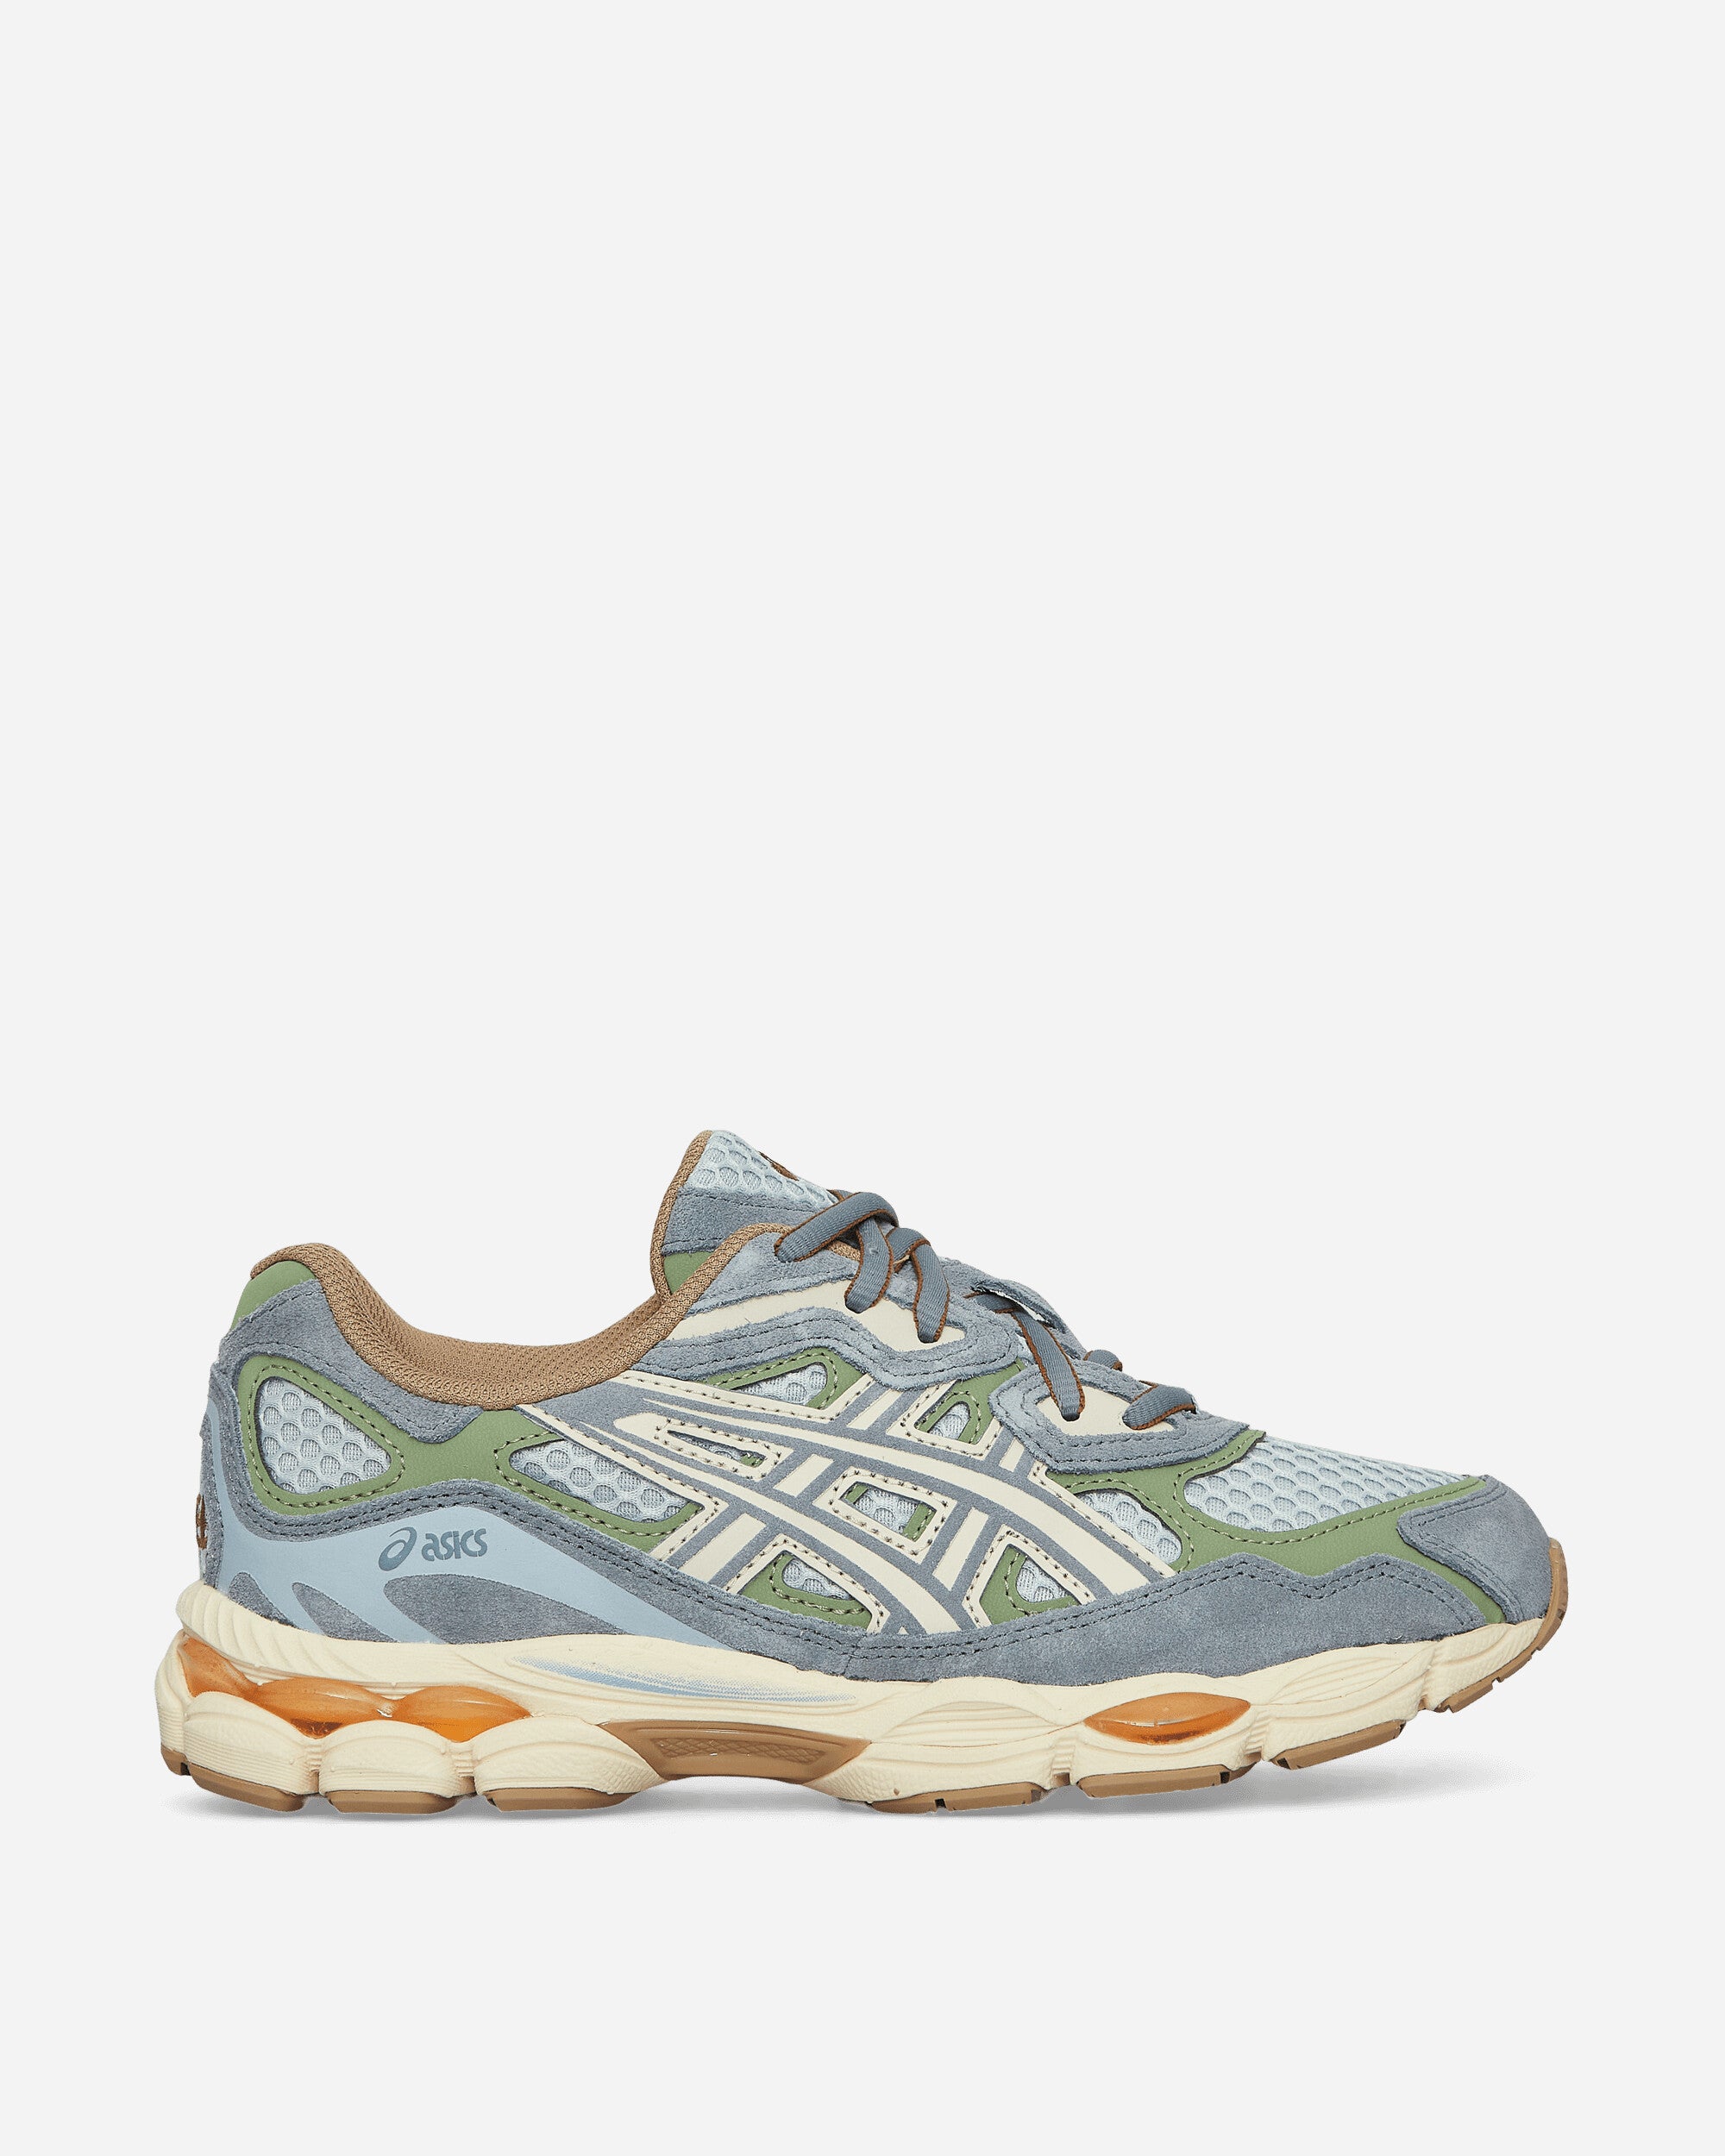 Asics Gel-Nyc Cold Moss/Fjord Grey Sneakers Low 1203A372-403